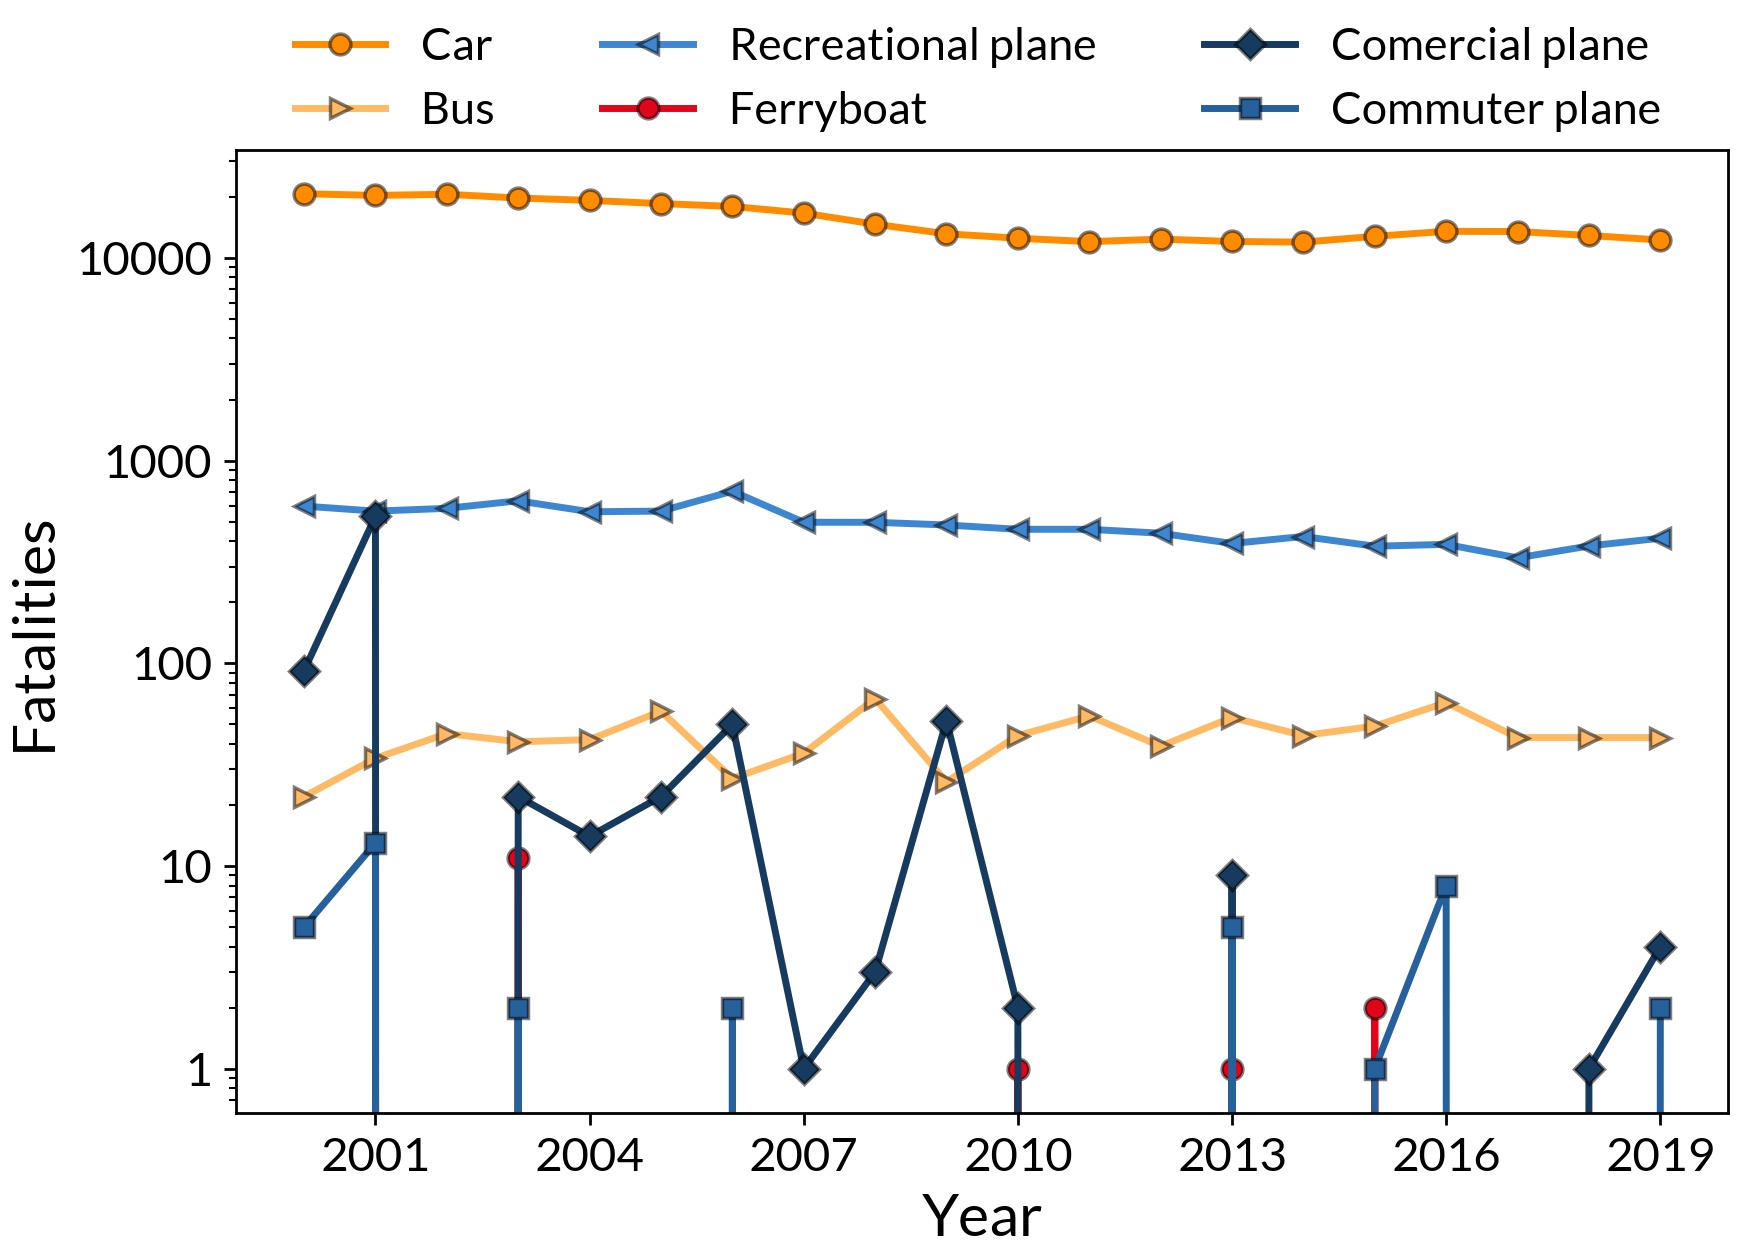 timeline of fatalities for different transportation modes between 2000-2019